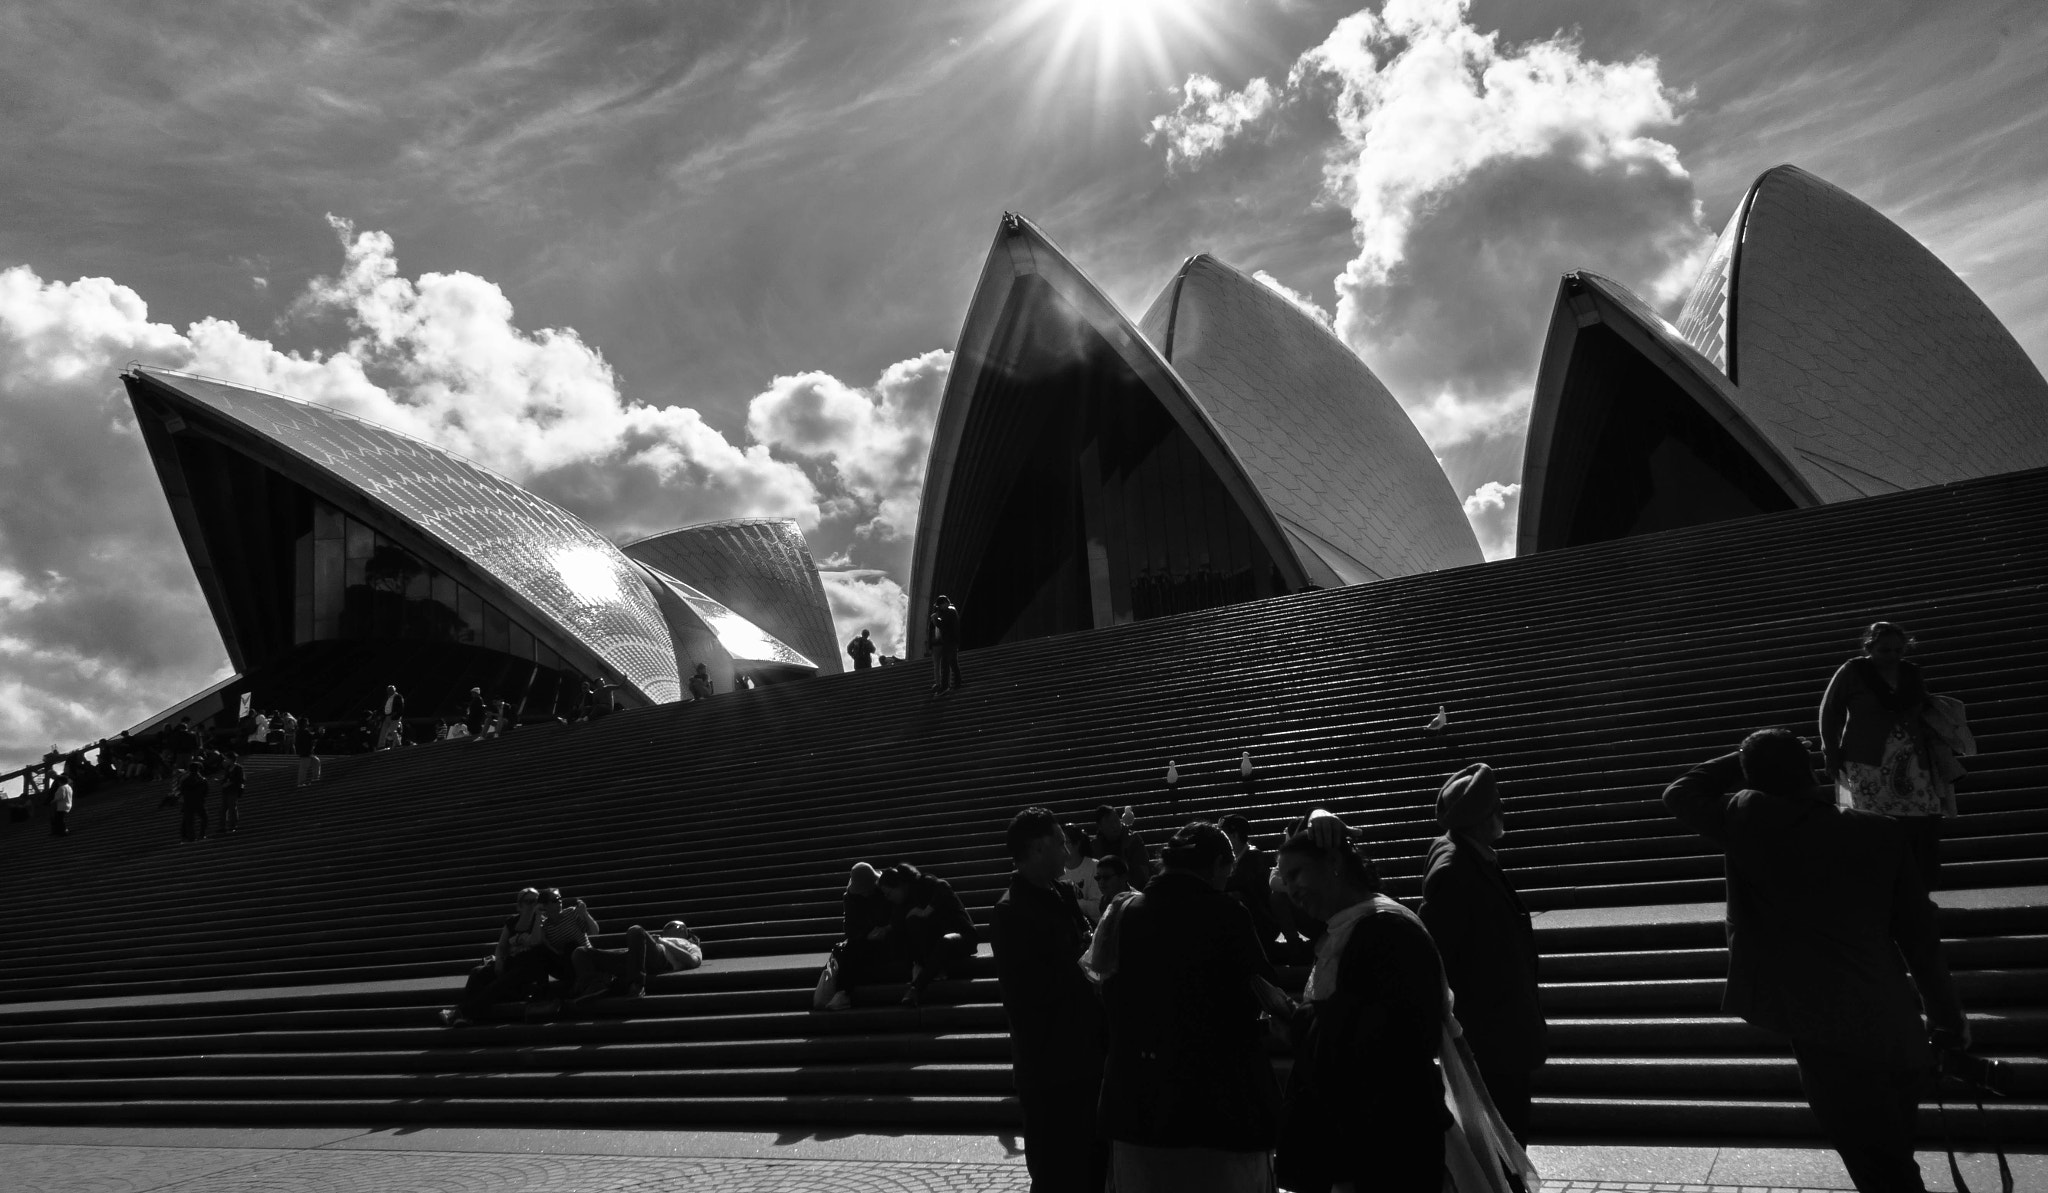 Sony a6000 sample photo. When in doubt go edit more pics of the opera house photography